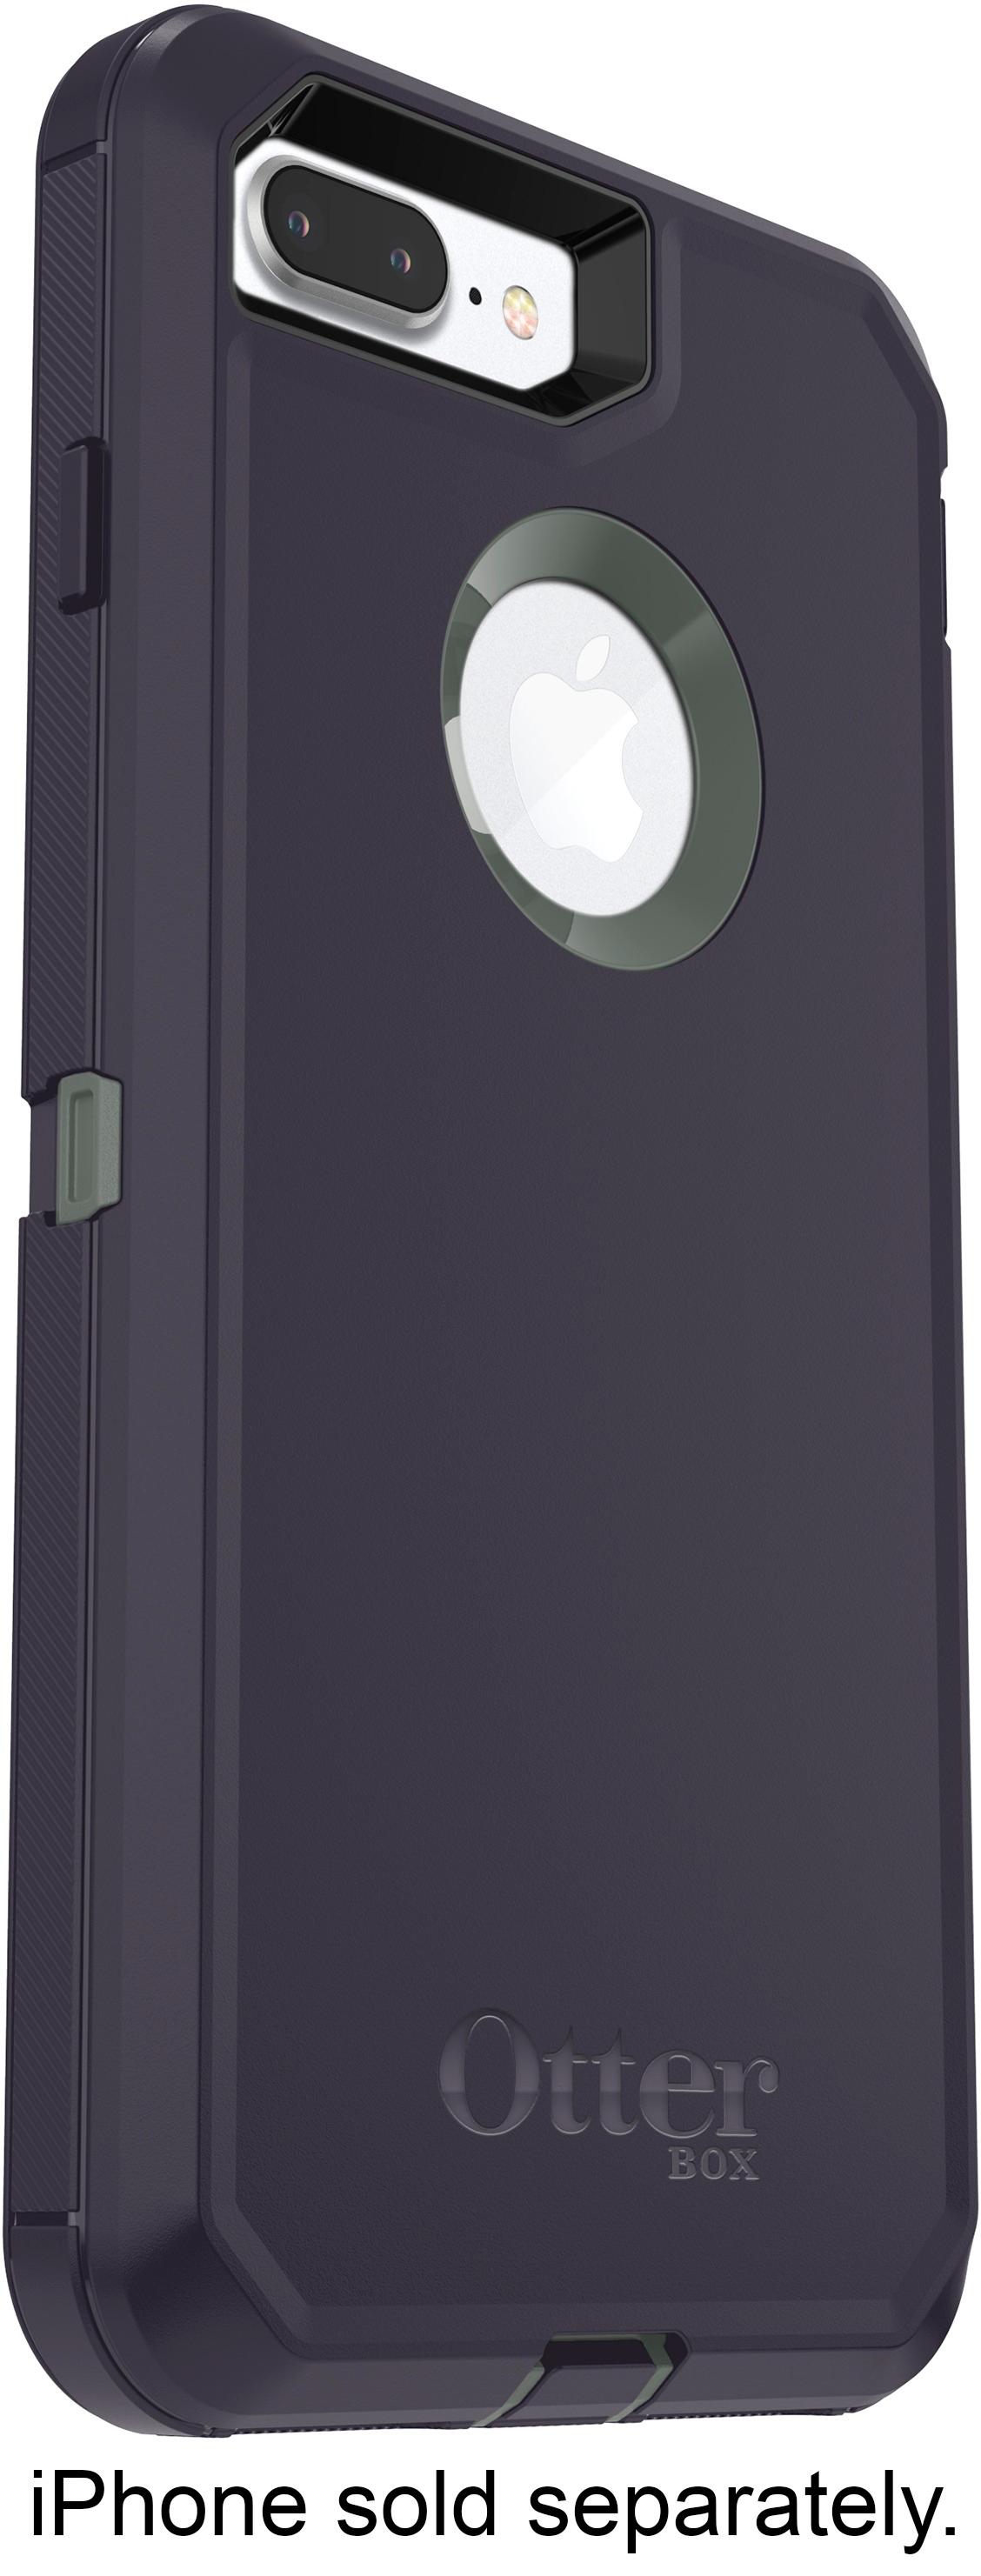 OtterBox Defender Series Pro Hard Shell Case for Apple iPhone 7, 8 and SE  (2nd generation) Black 77-60592 - Best Buy